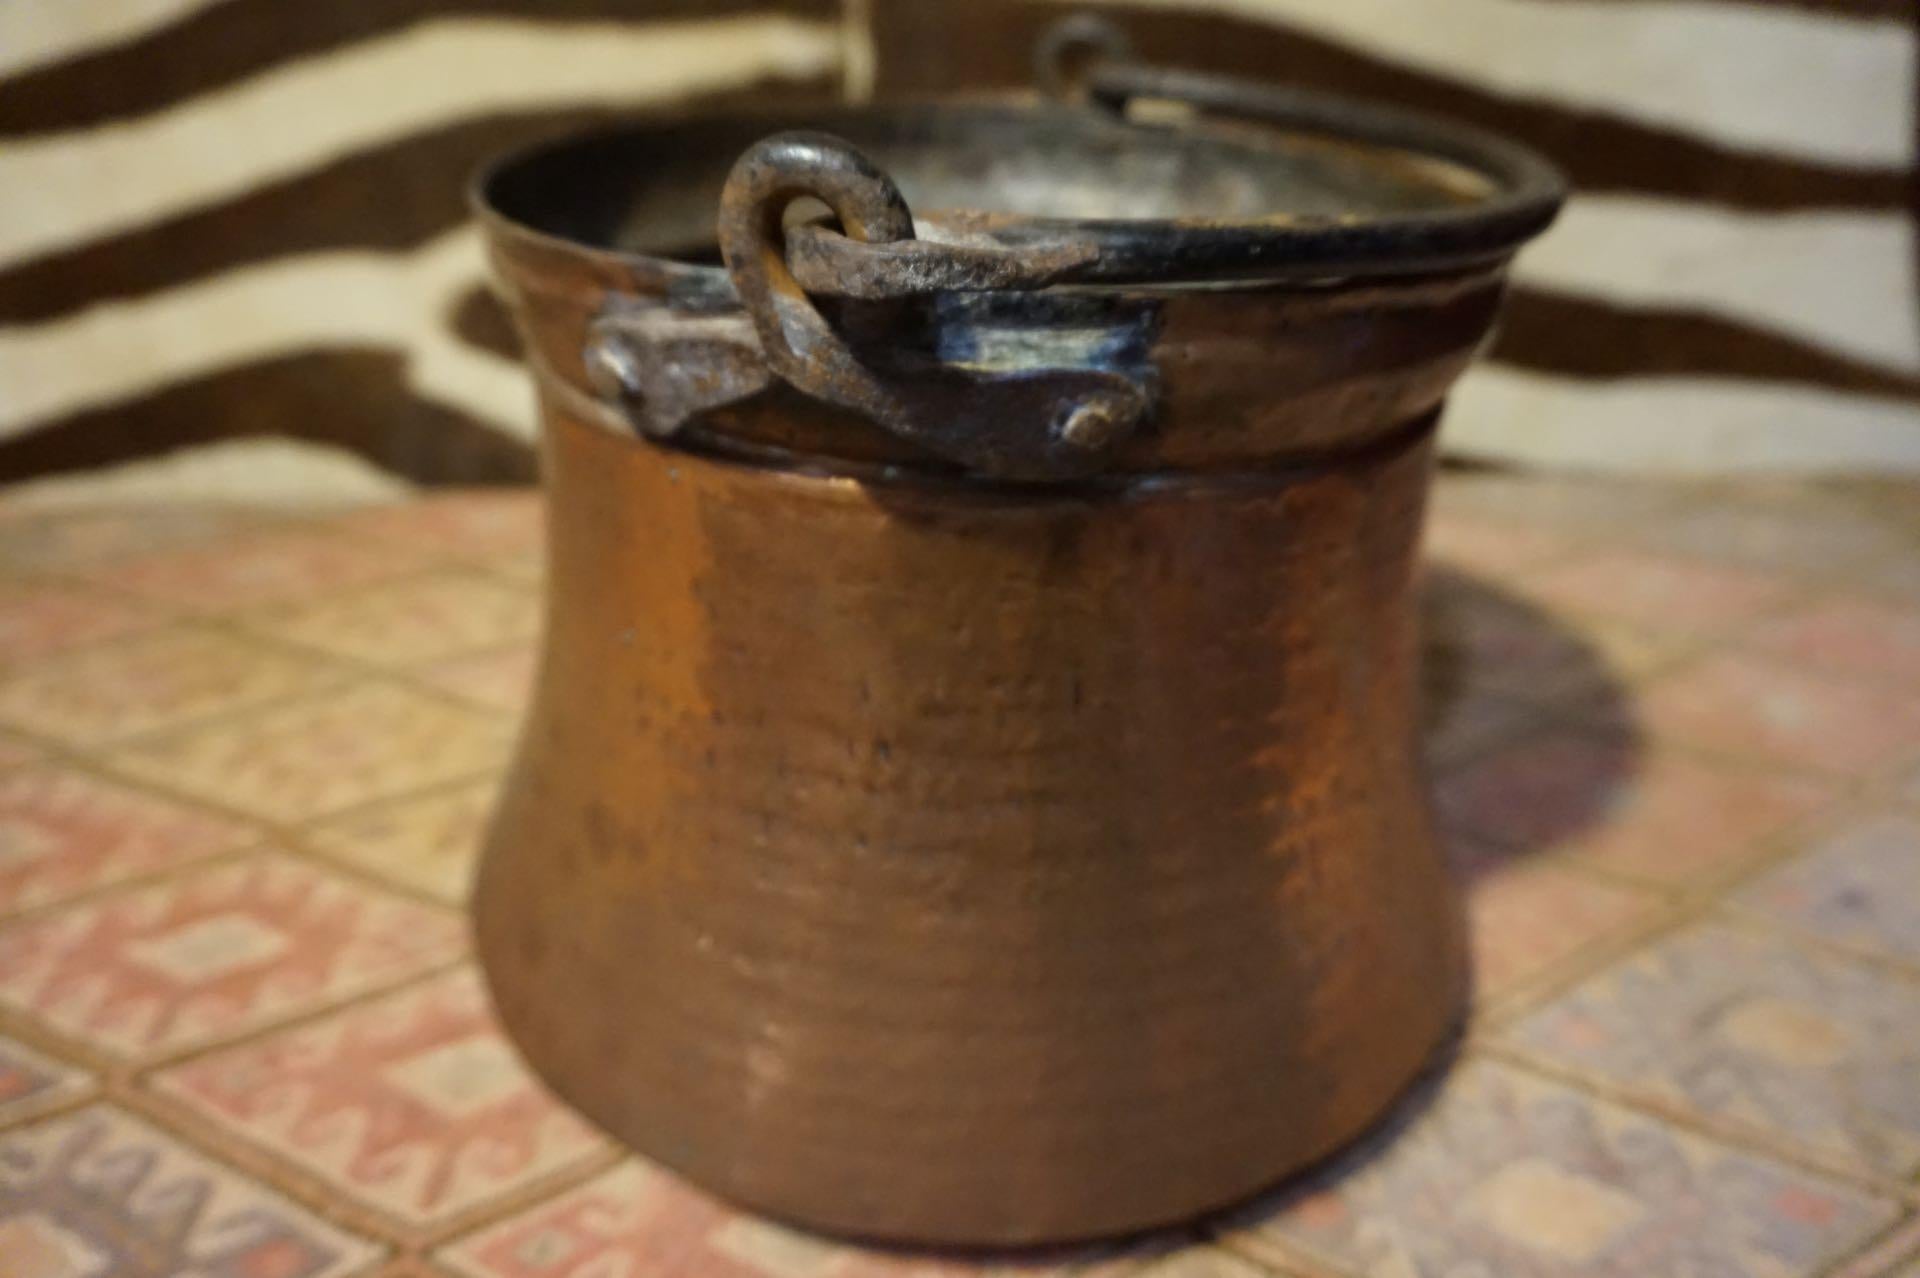 Top notch blacksmithing with seamless hammered copper work. Signs of oxidization inside with hand hammered marks, rivets and curved and tapered handle all point to good age on this concave and beautifully constructed bucket. This kind of workmanship